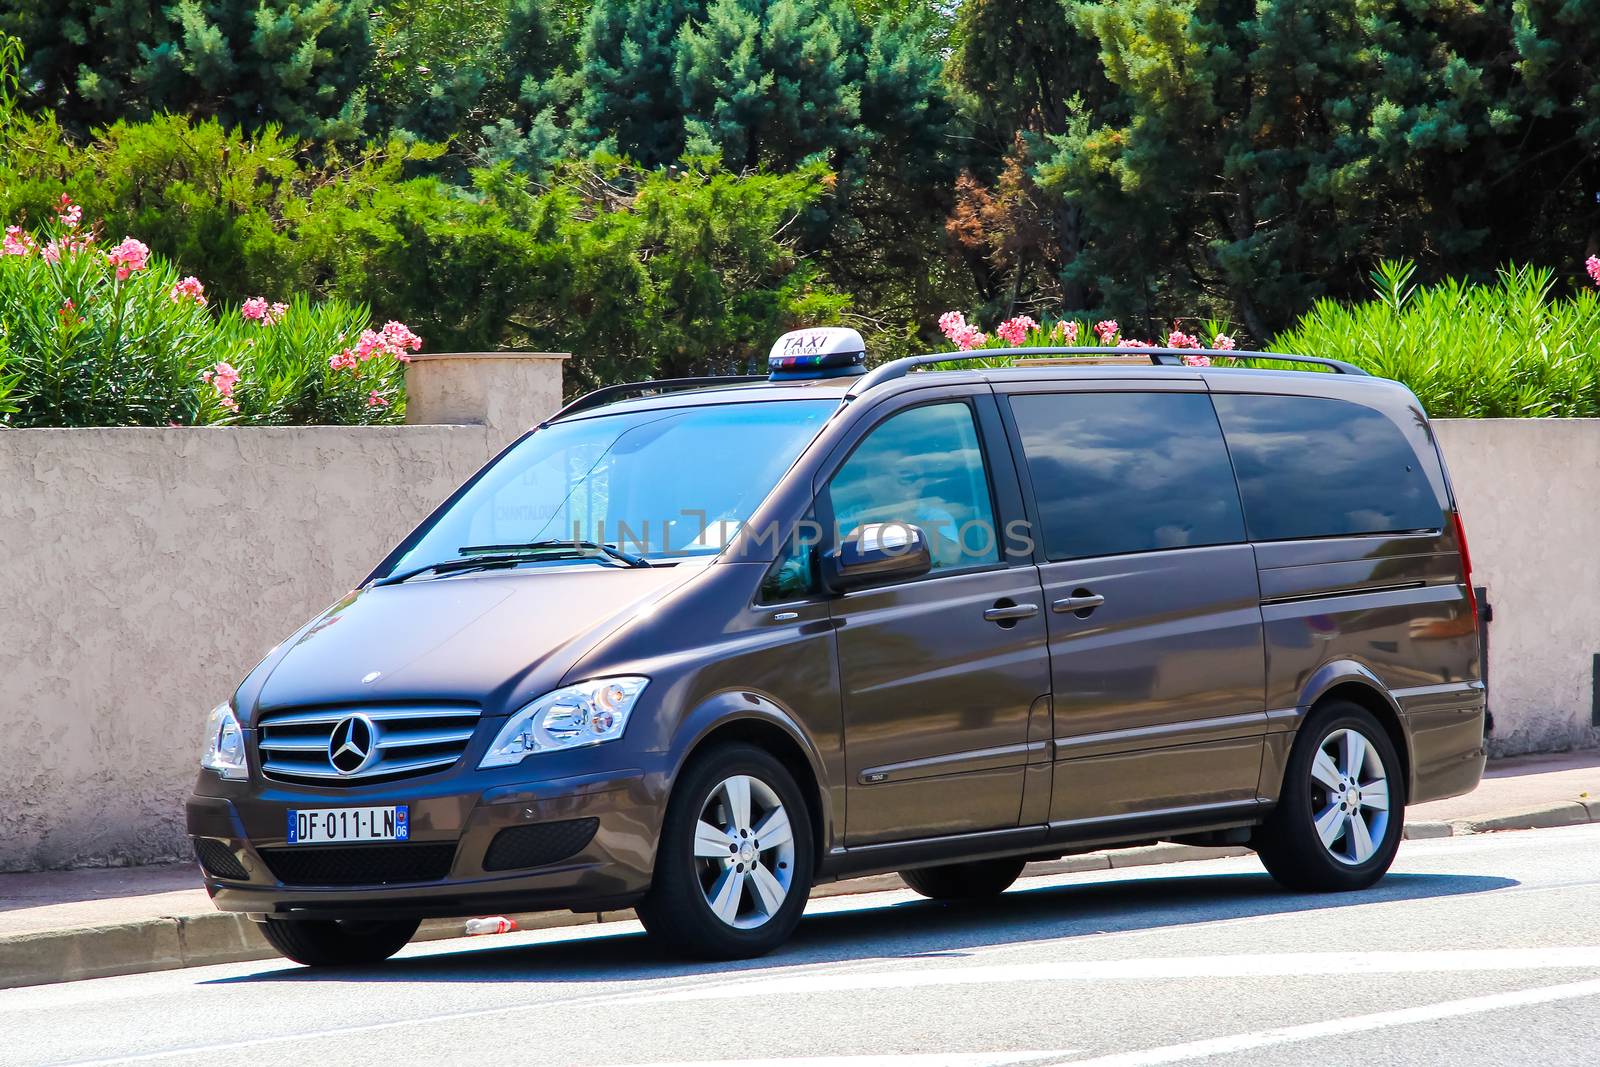 SAINT-TROPEZ, FRANCE - AUGUST 3, 2014: Motor car Mercedes-Benz W639 Viano at the city street.